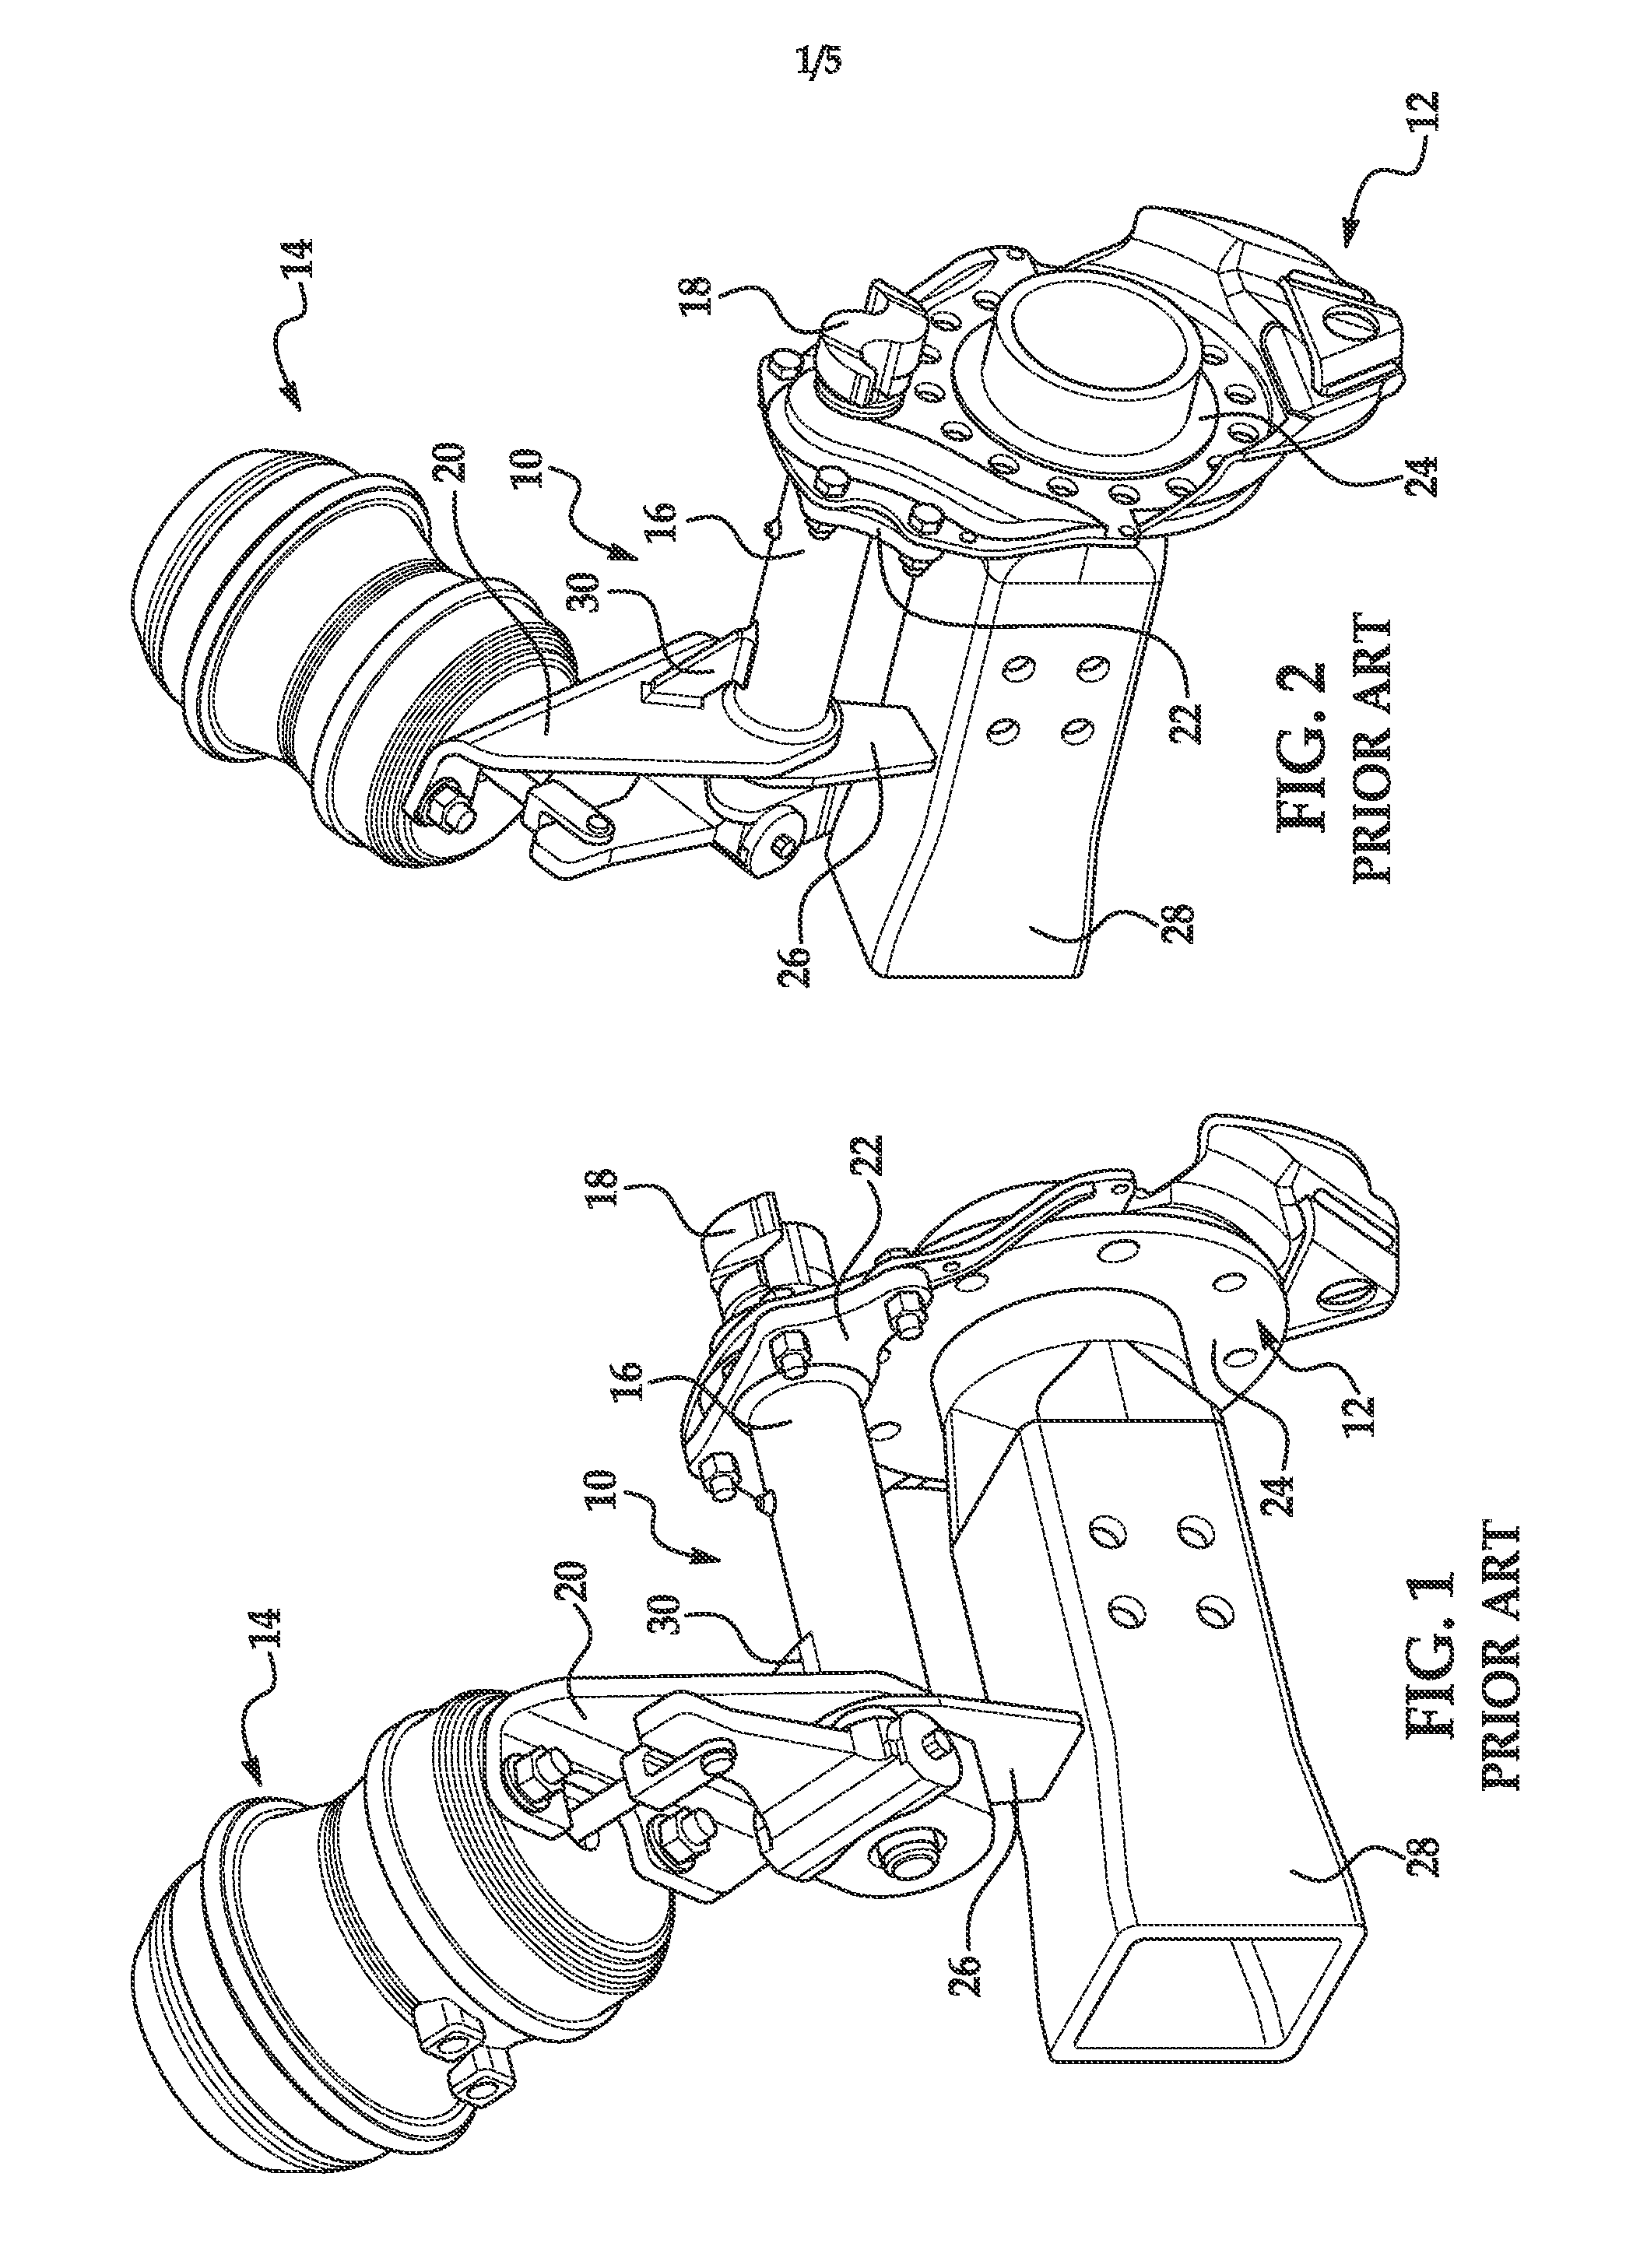 Rigid Bracket Assembly for Mounting a Brake Assembly and Brake Actuator